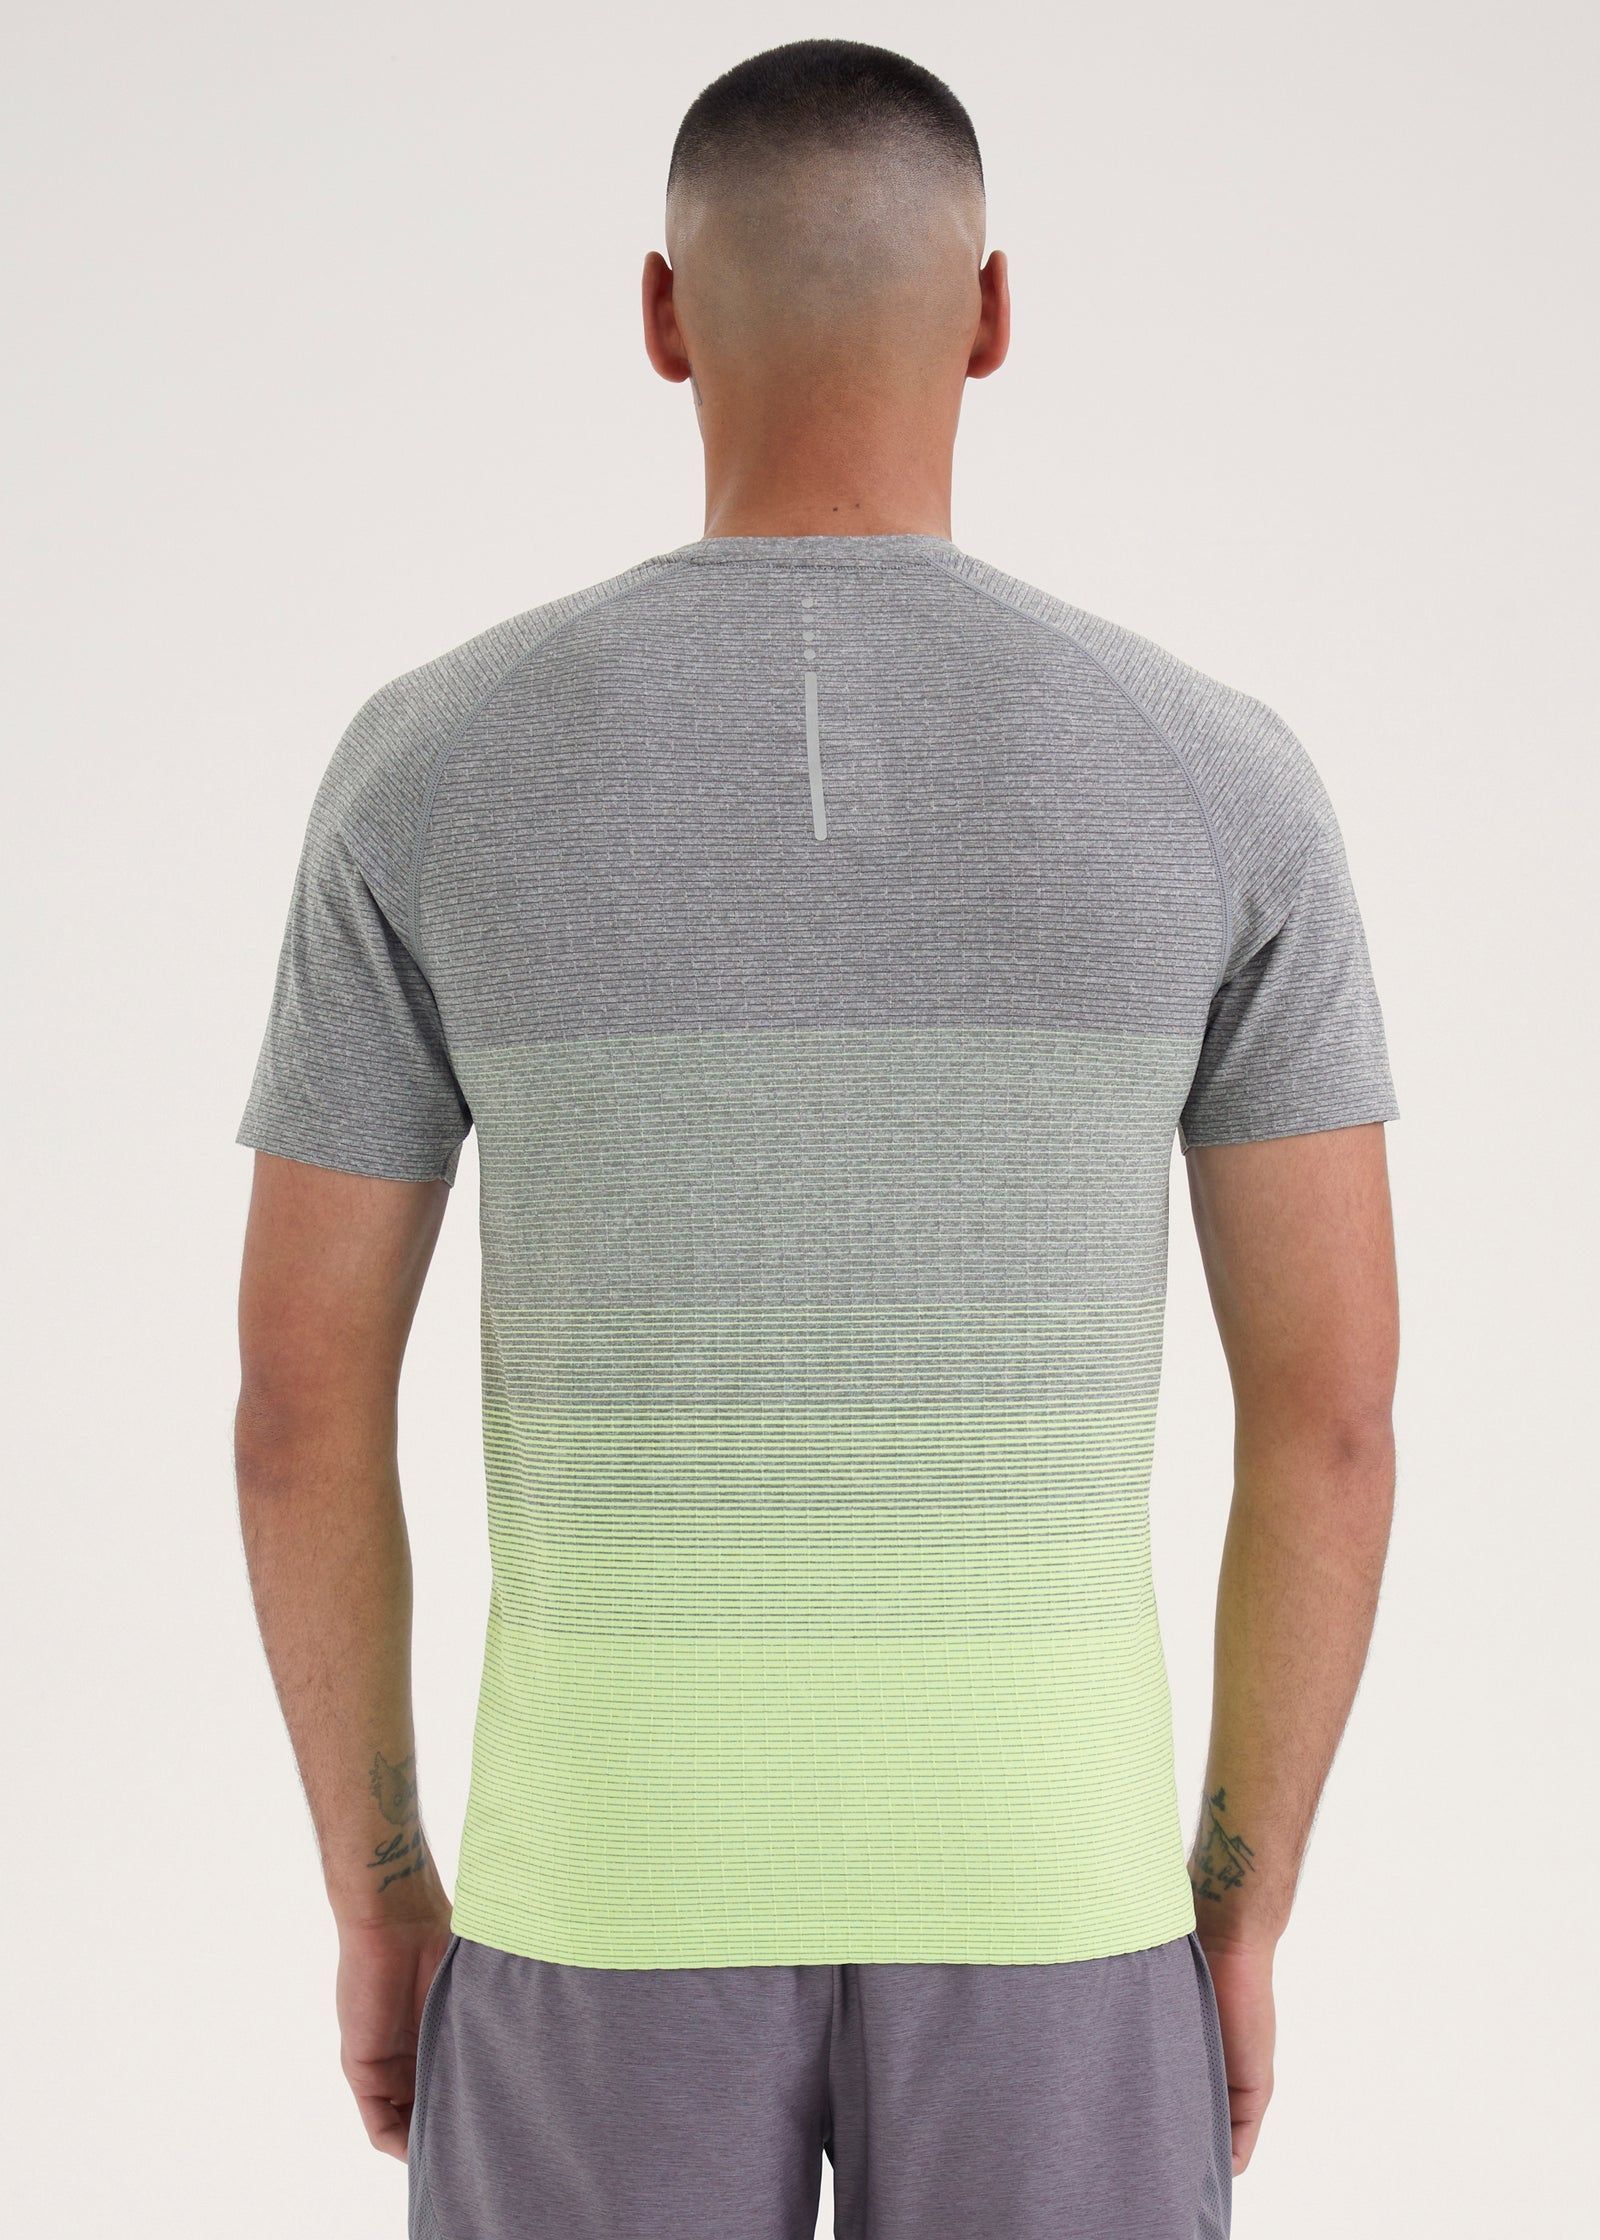 Souluxe Grey & Lime Ombre Sports T-Shirt - Multi - L